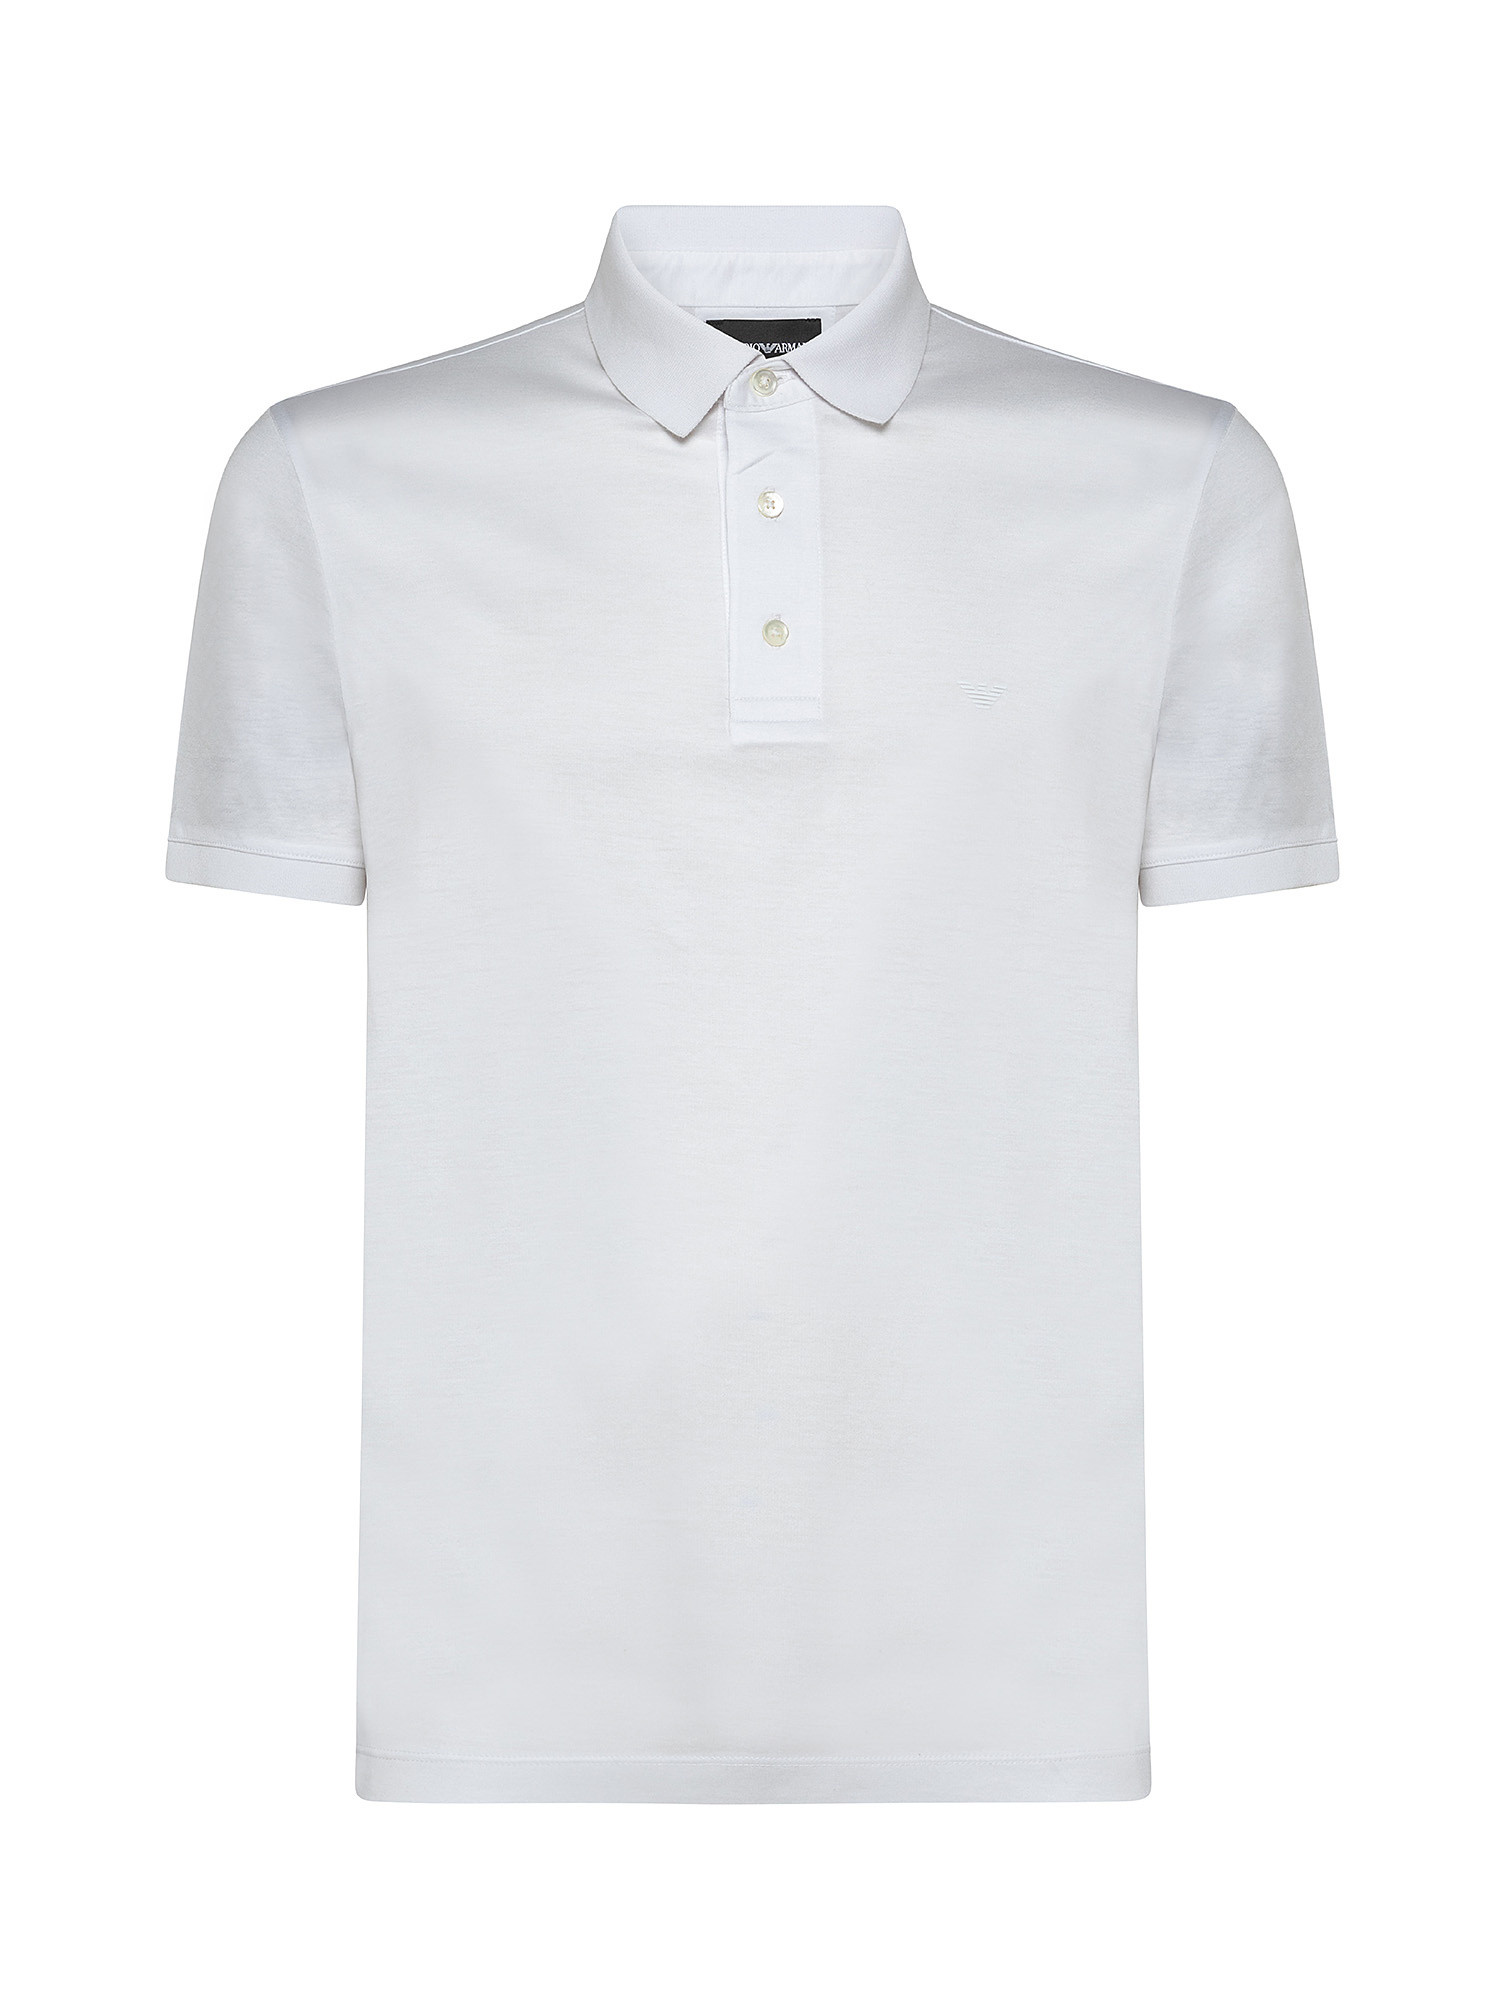 Polo, White, large image number 0